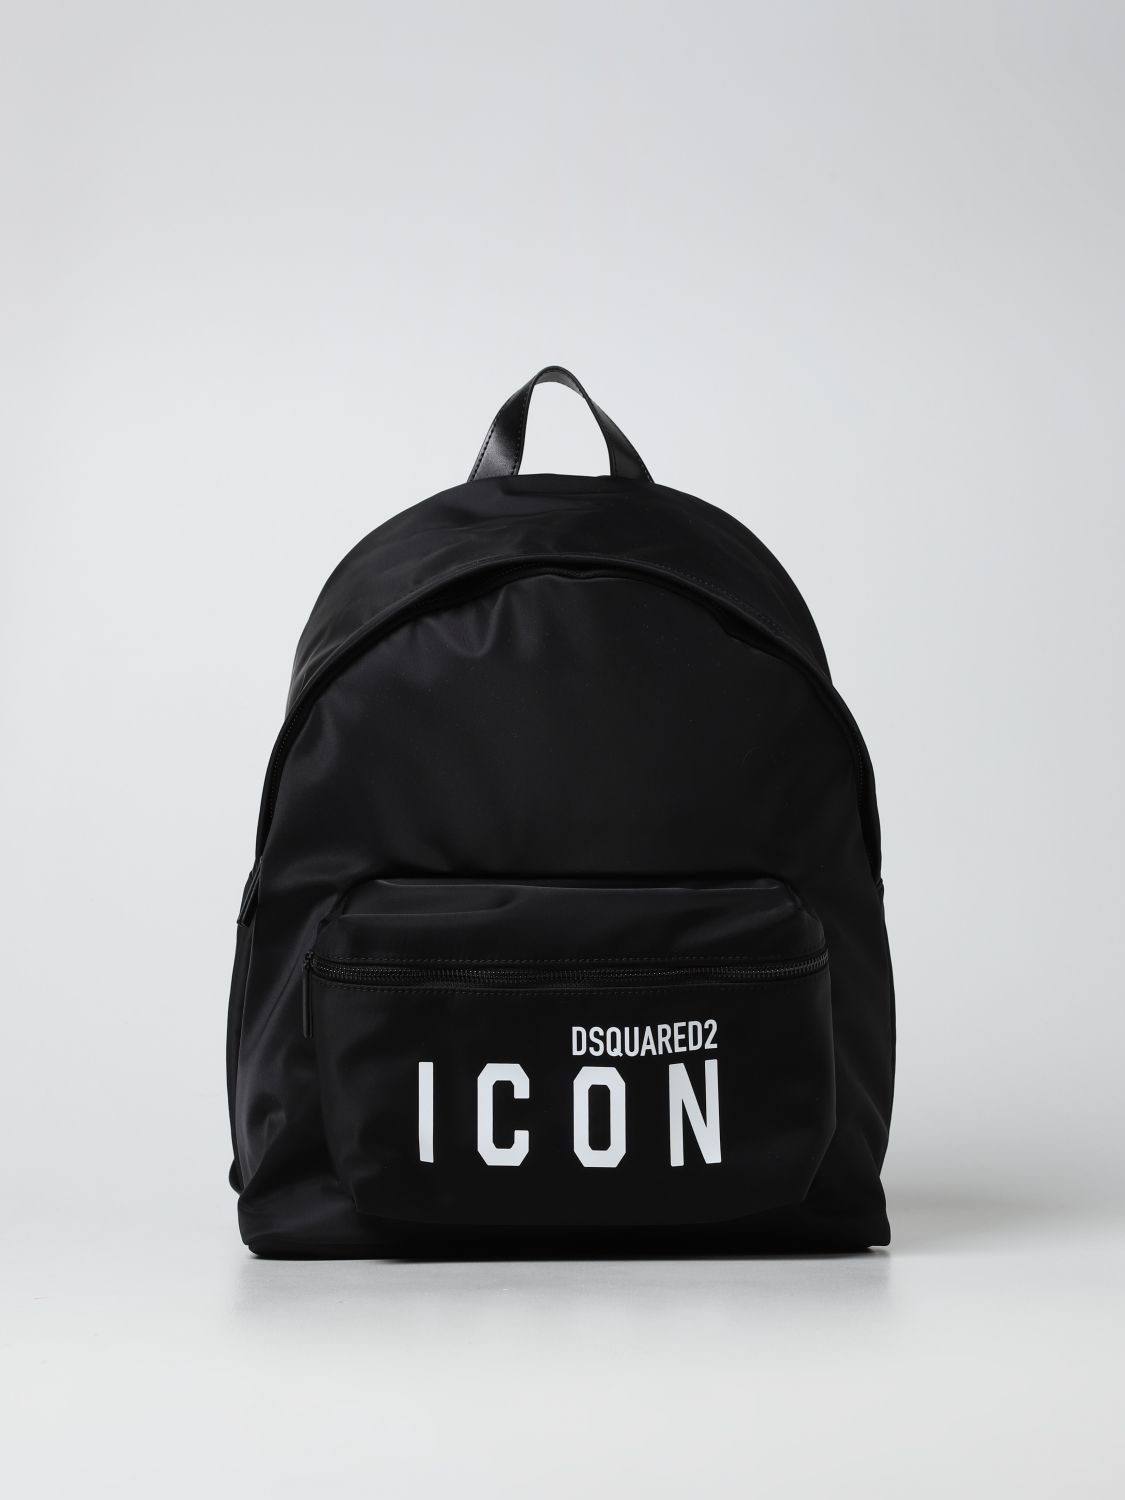 Source bottleneck coin DSQUARED2: Icon backpack in technical fabric - Black | Dsquared2 backpack  BPM005211703199 online on GIGLIO.COM